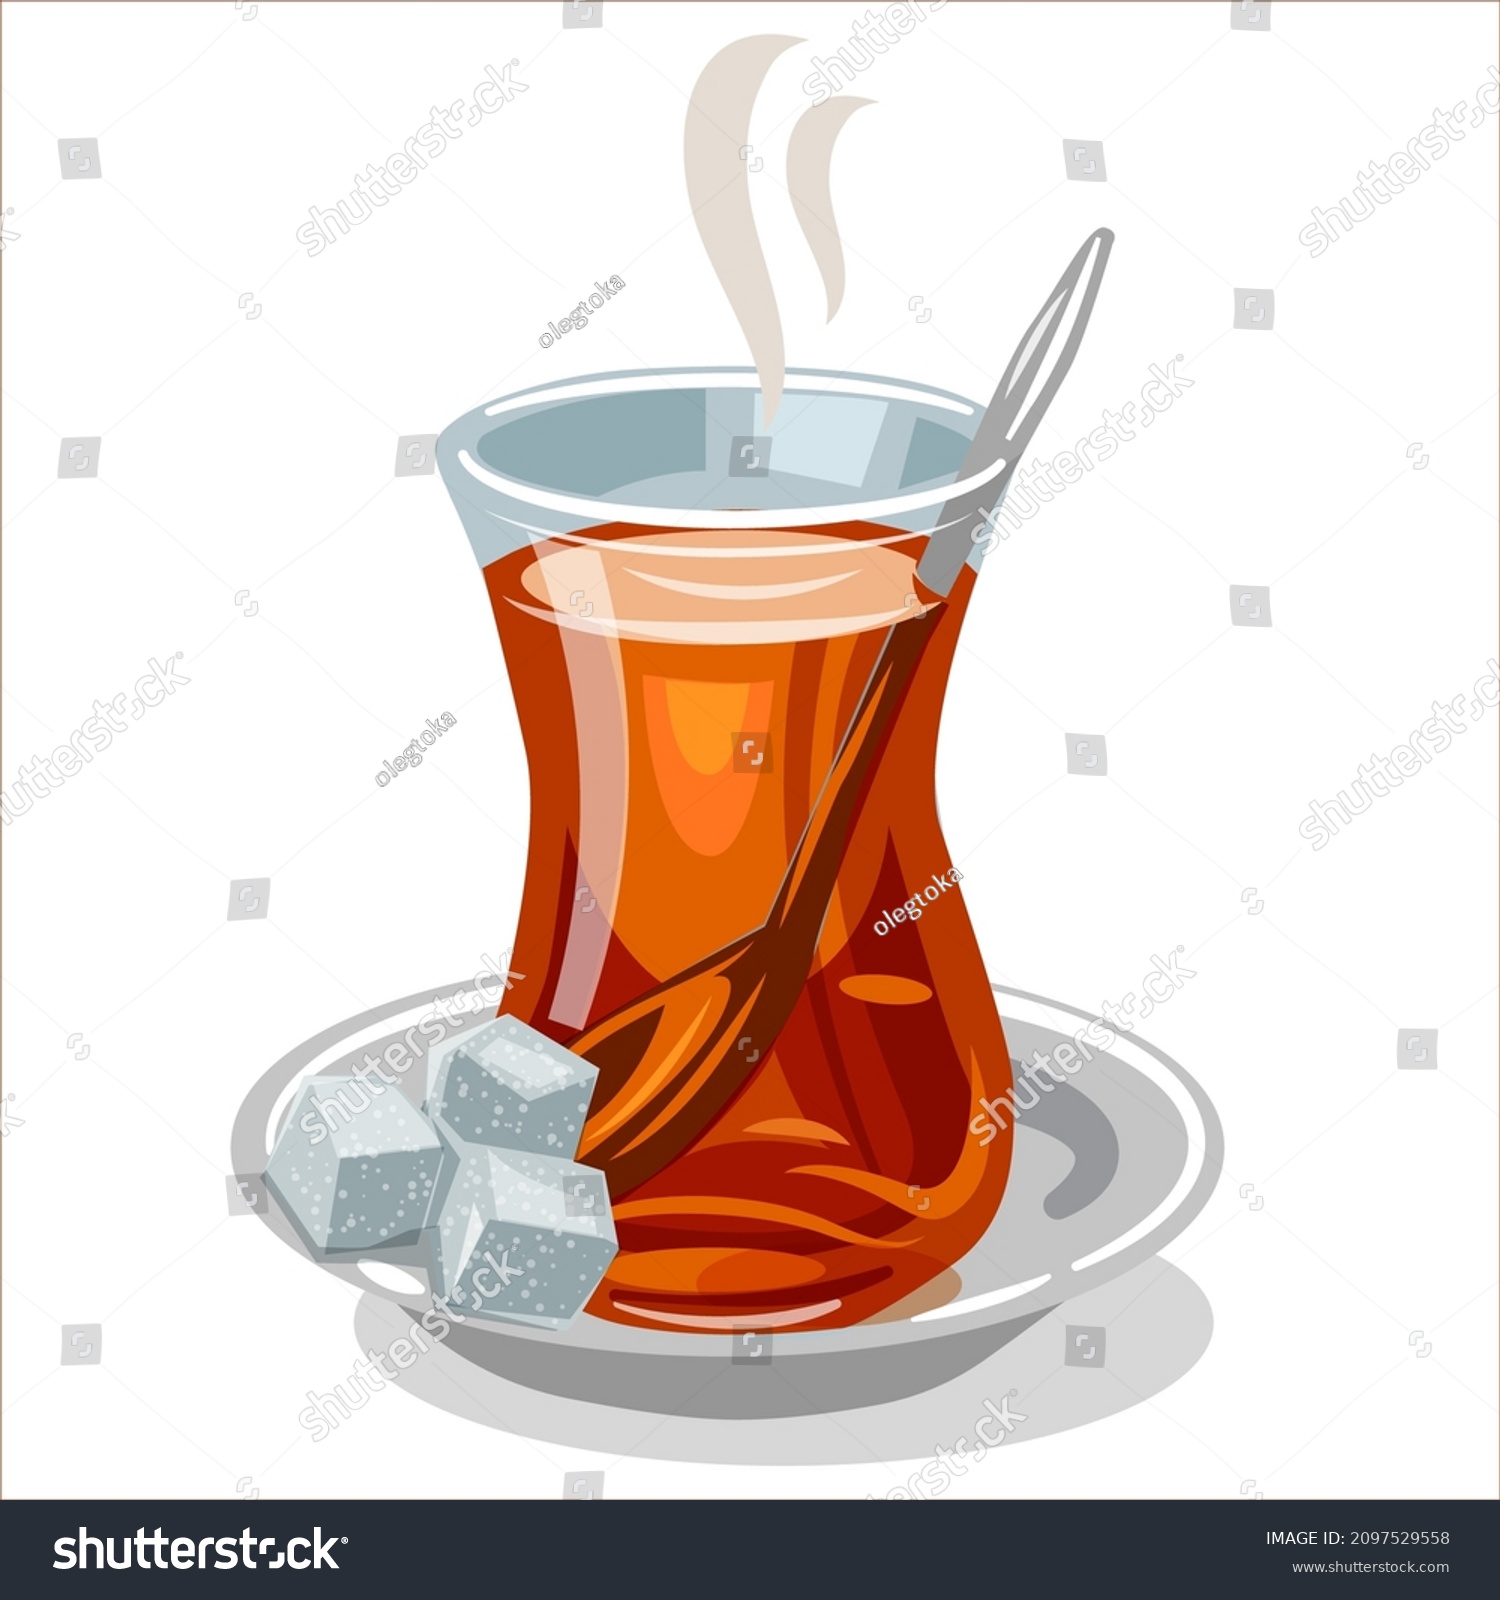 SVG of Turkish authentic traditional black tea in the glass with a sugar cubes svg